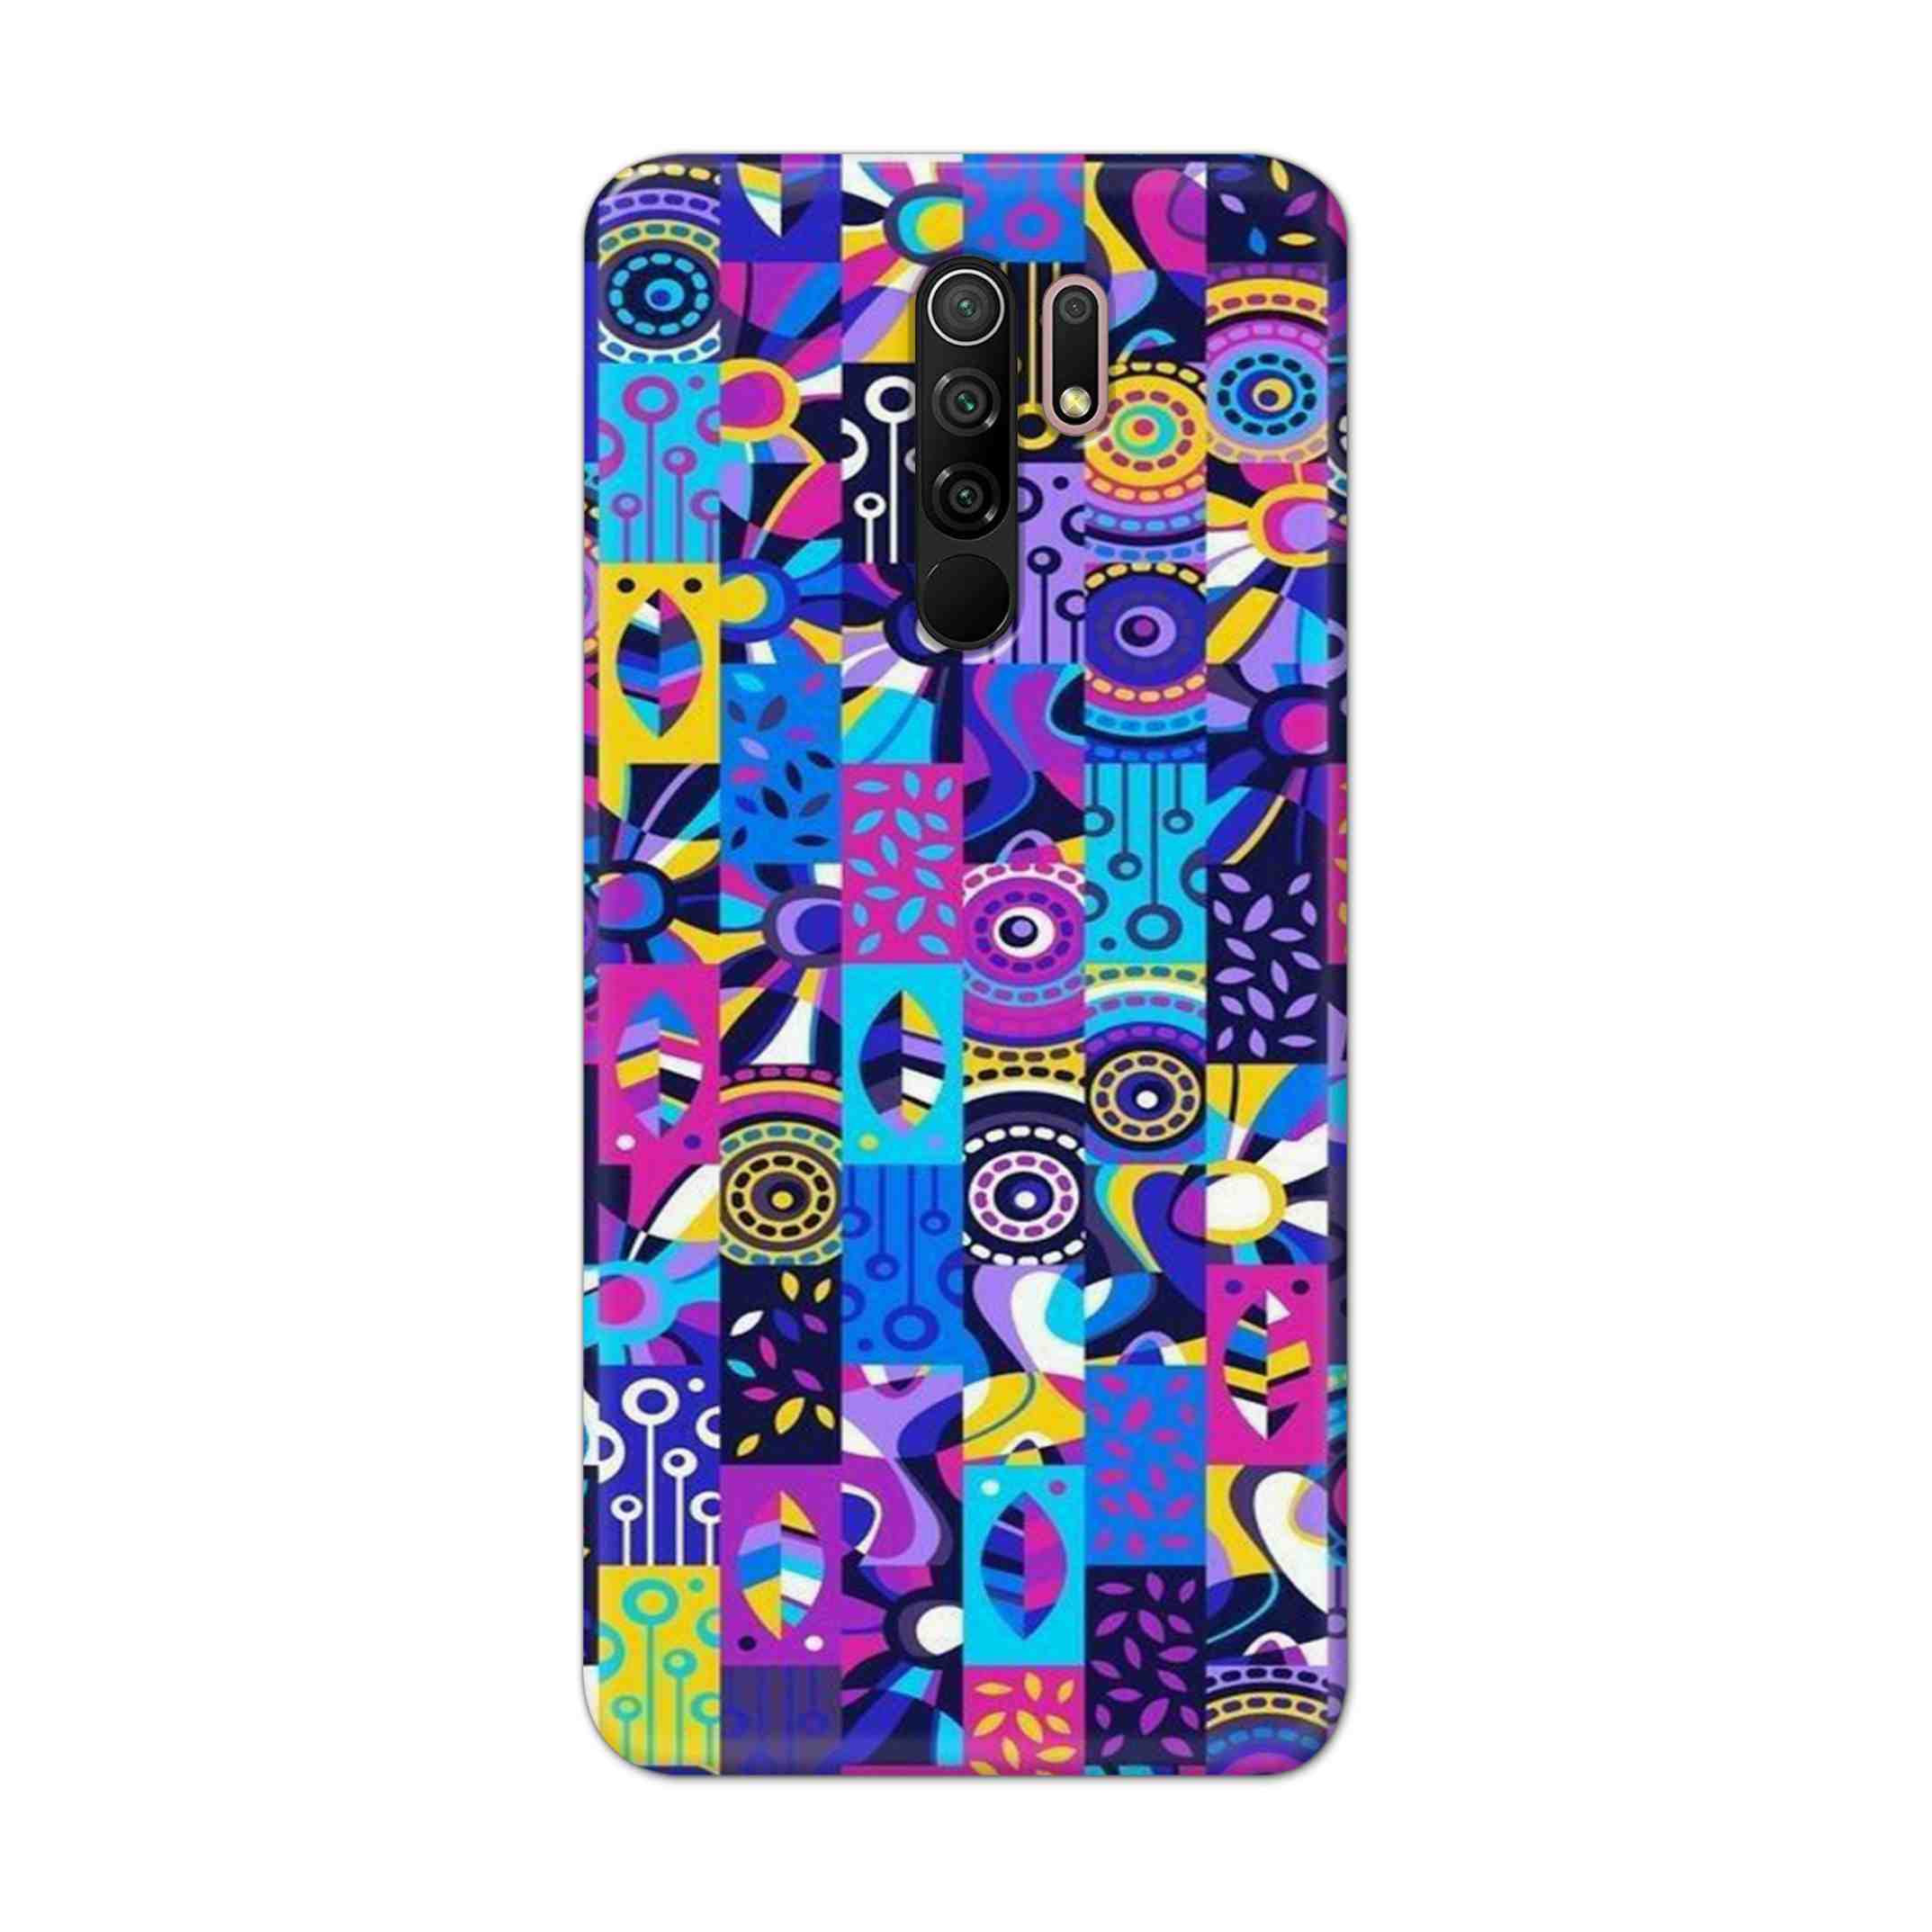 Buy Rainbow Art Hard Back Mobile Phone Case Cover For Xiaomi Redmi 9 Prime Online